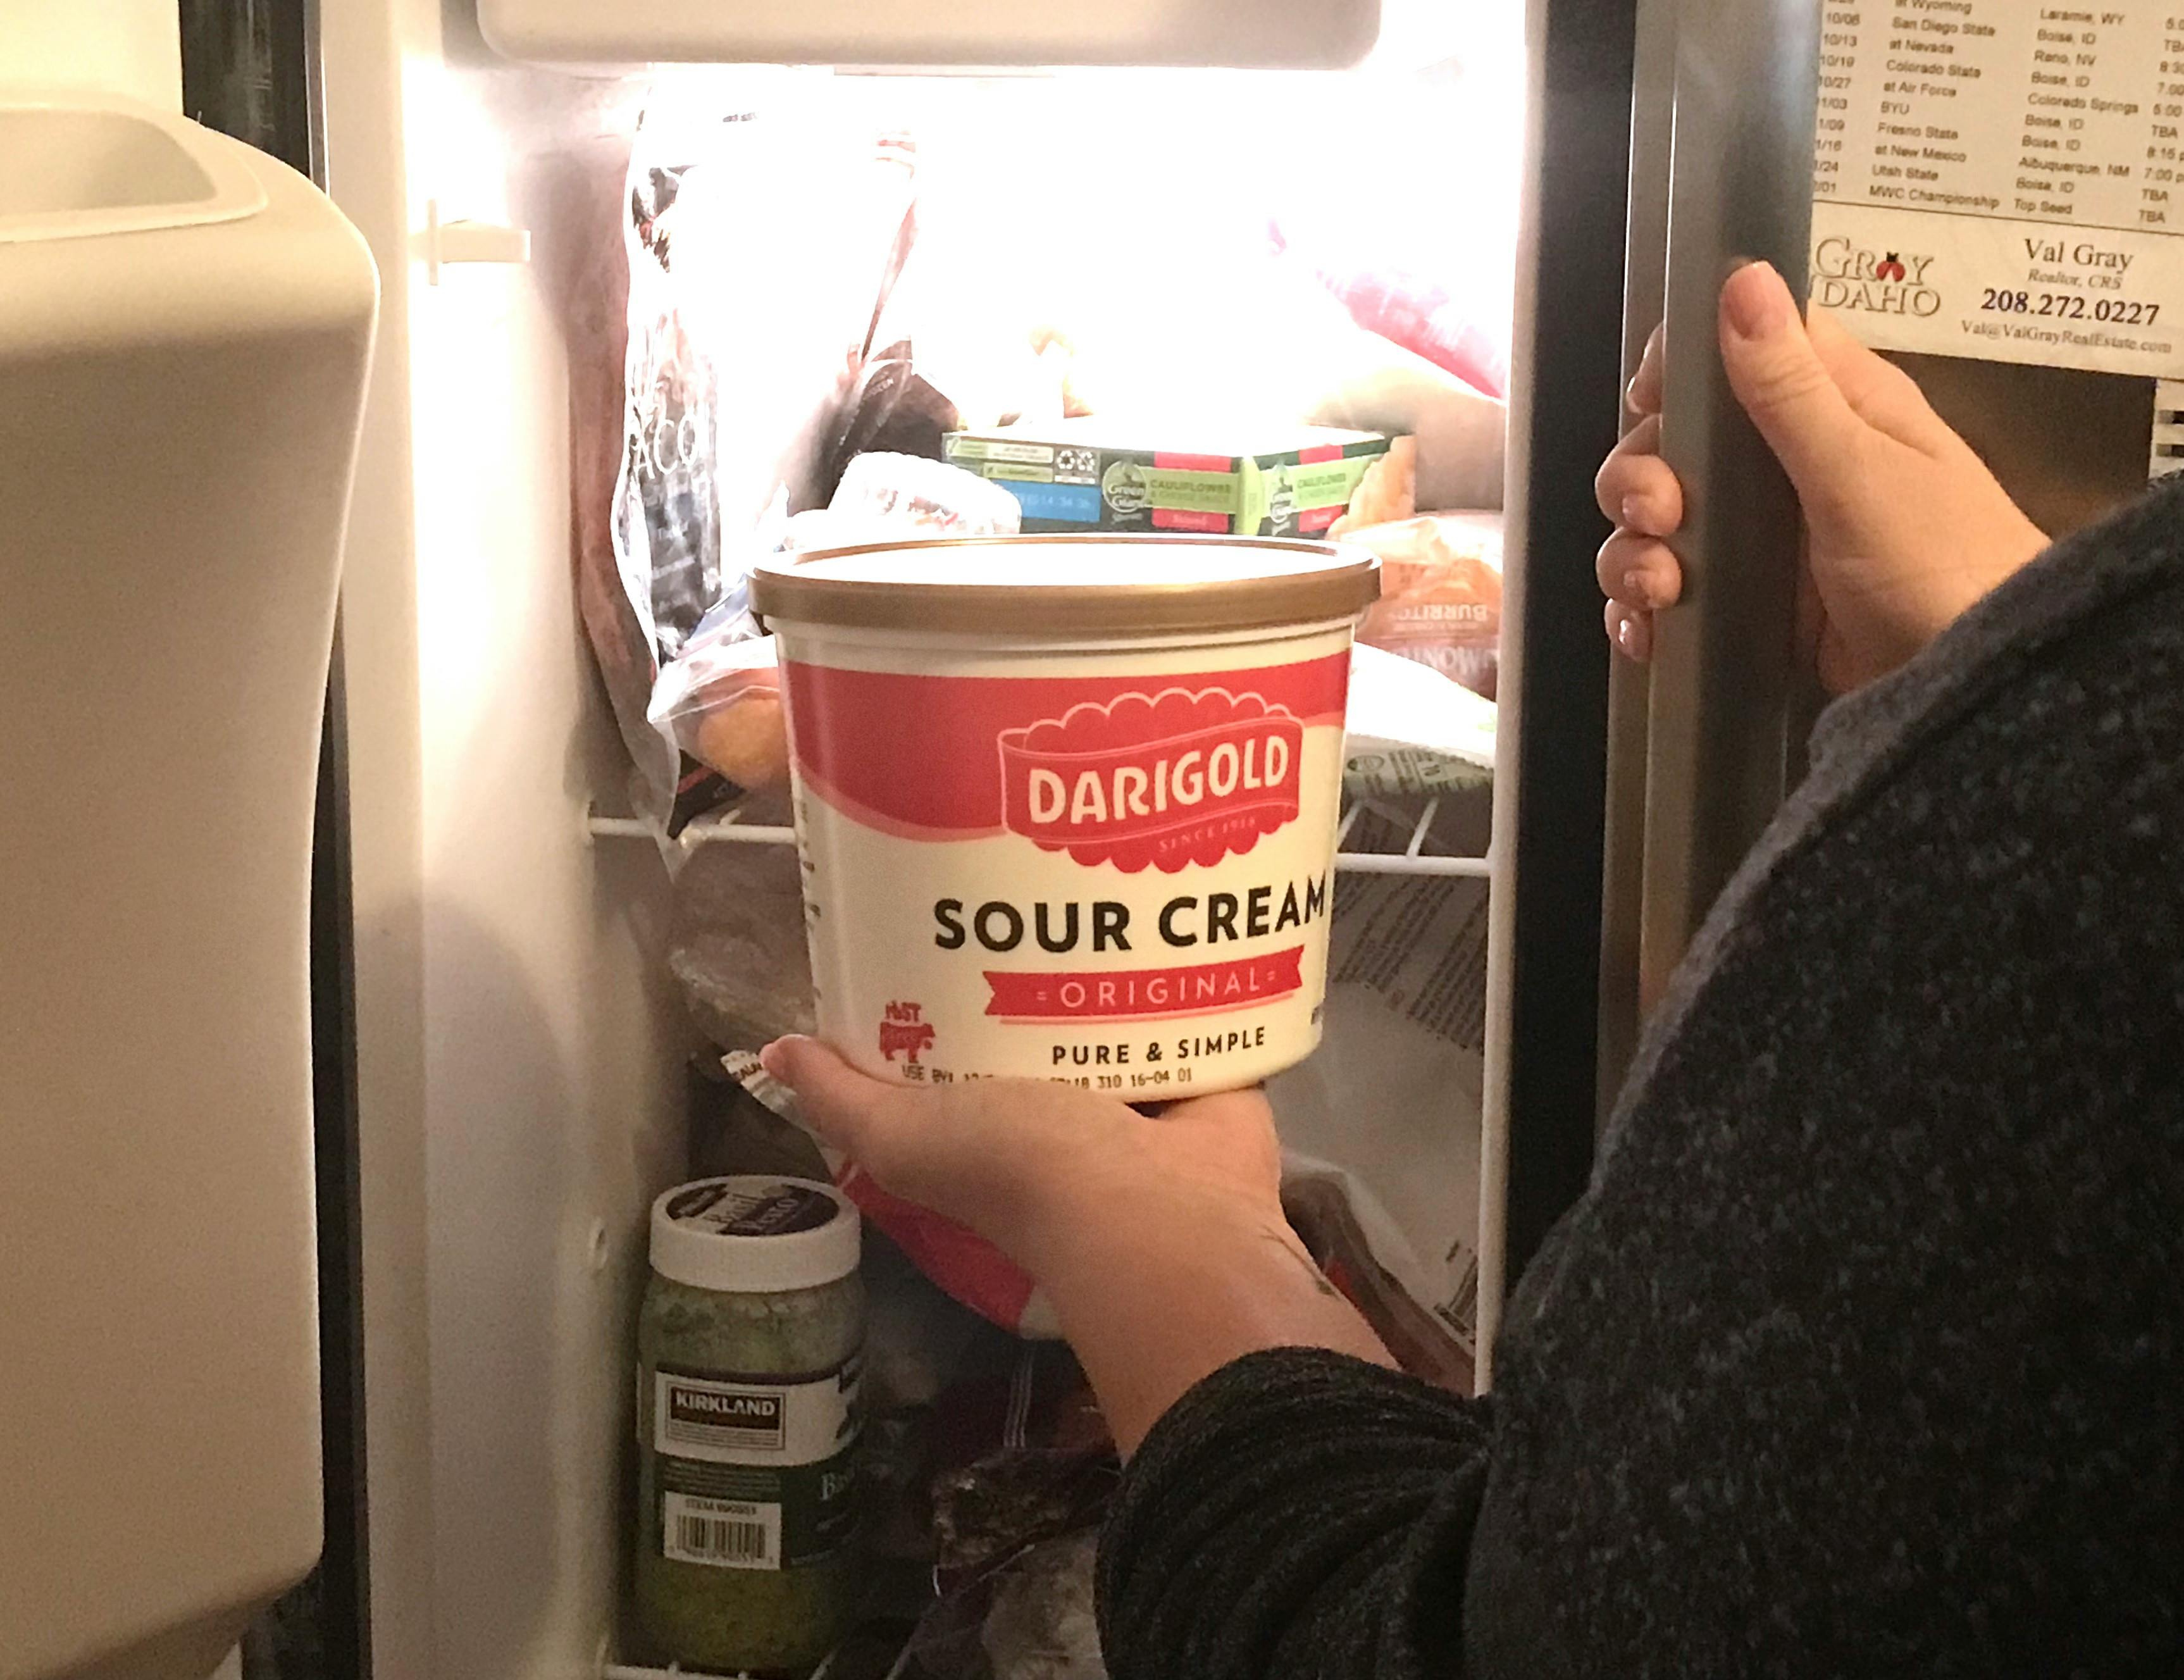 A person holding a container of sour cream in front of a refrigerator.